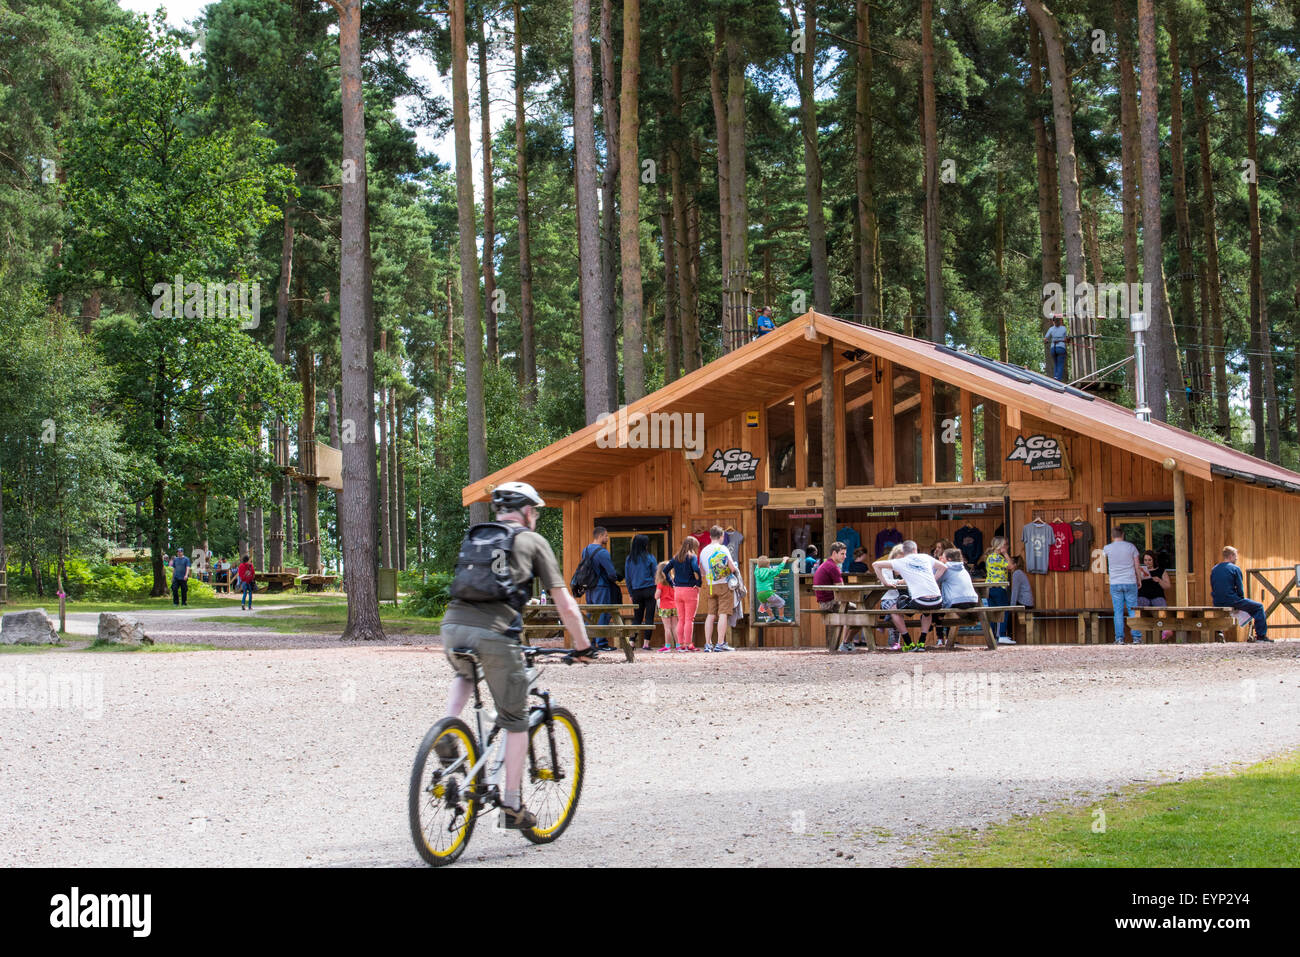 A man cycling and people sitting on benches outside Go Ape activity centre cannock chase Staffordshire West Midlands UK Stock Photo